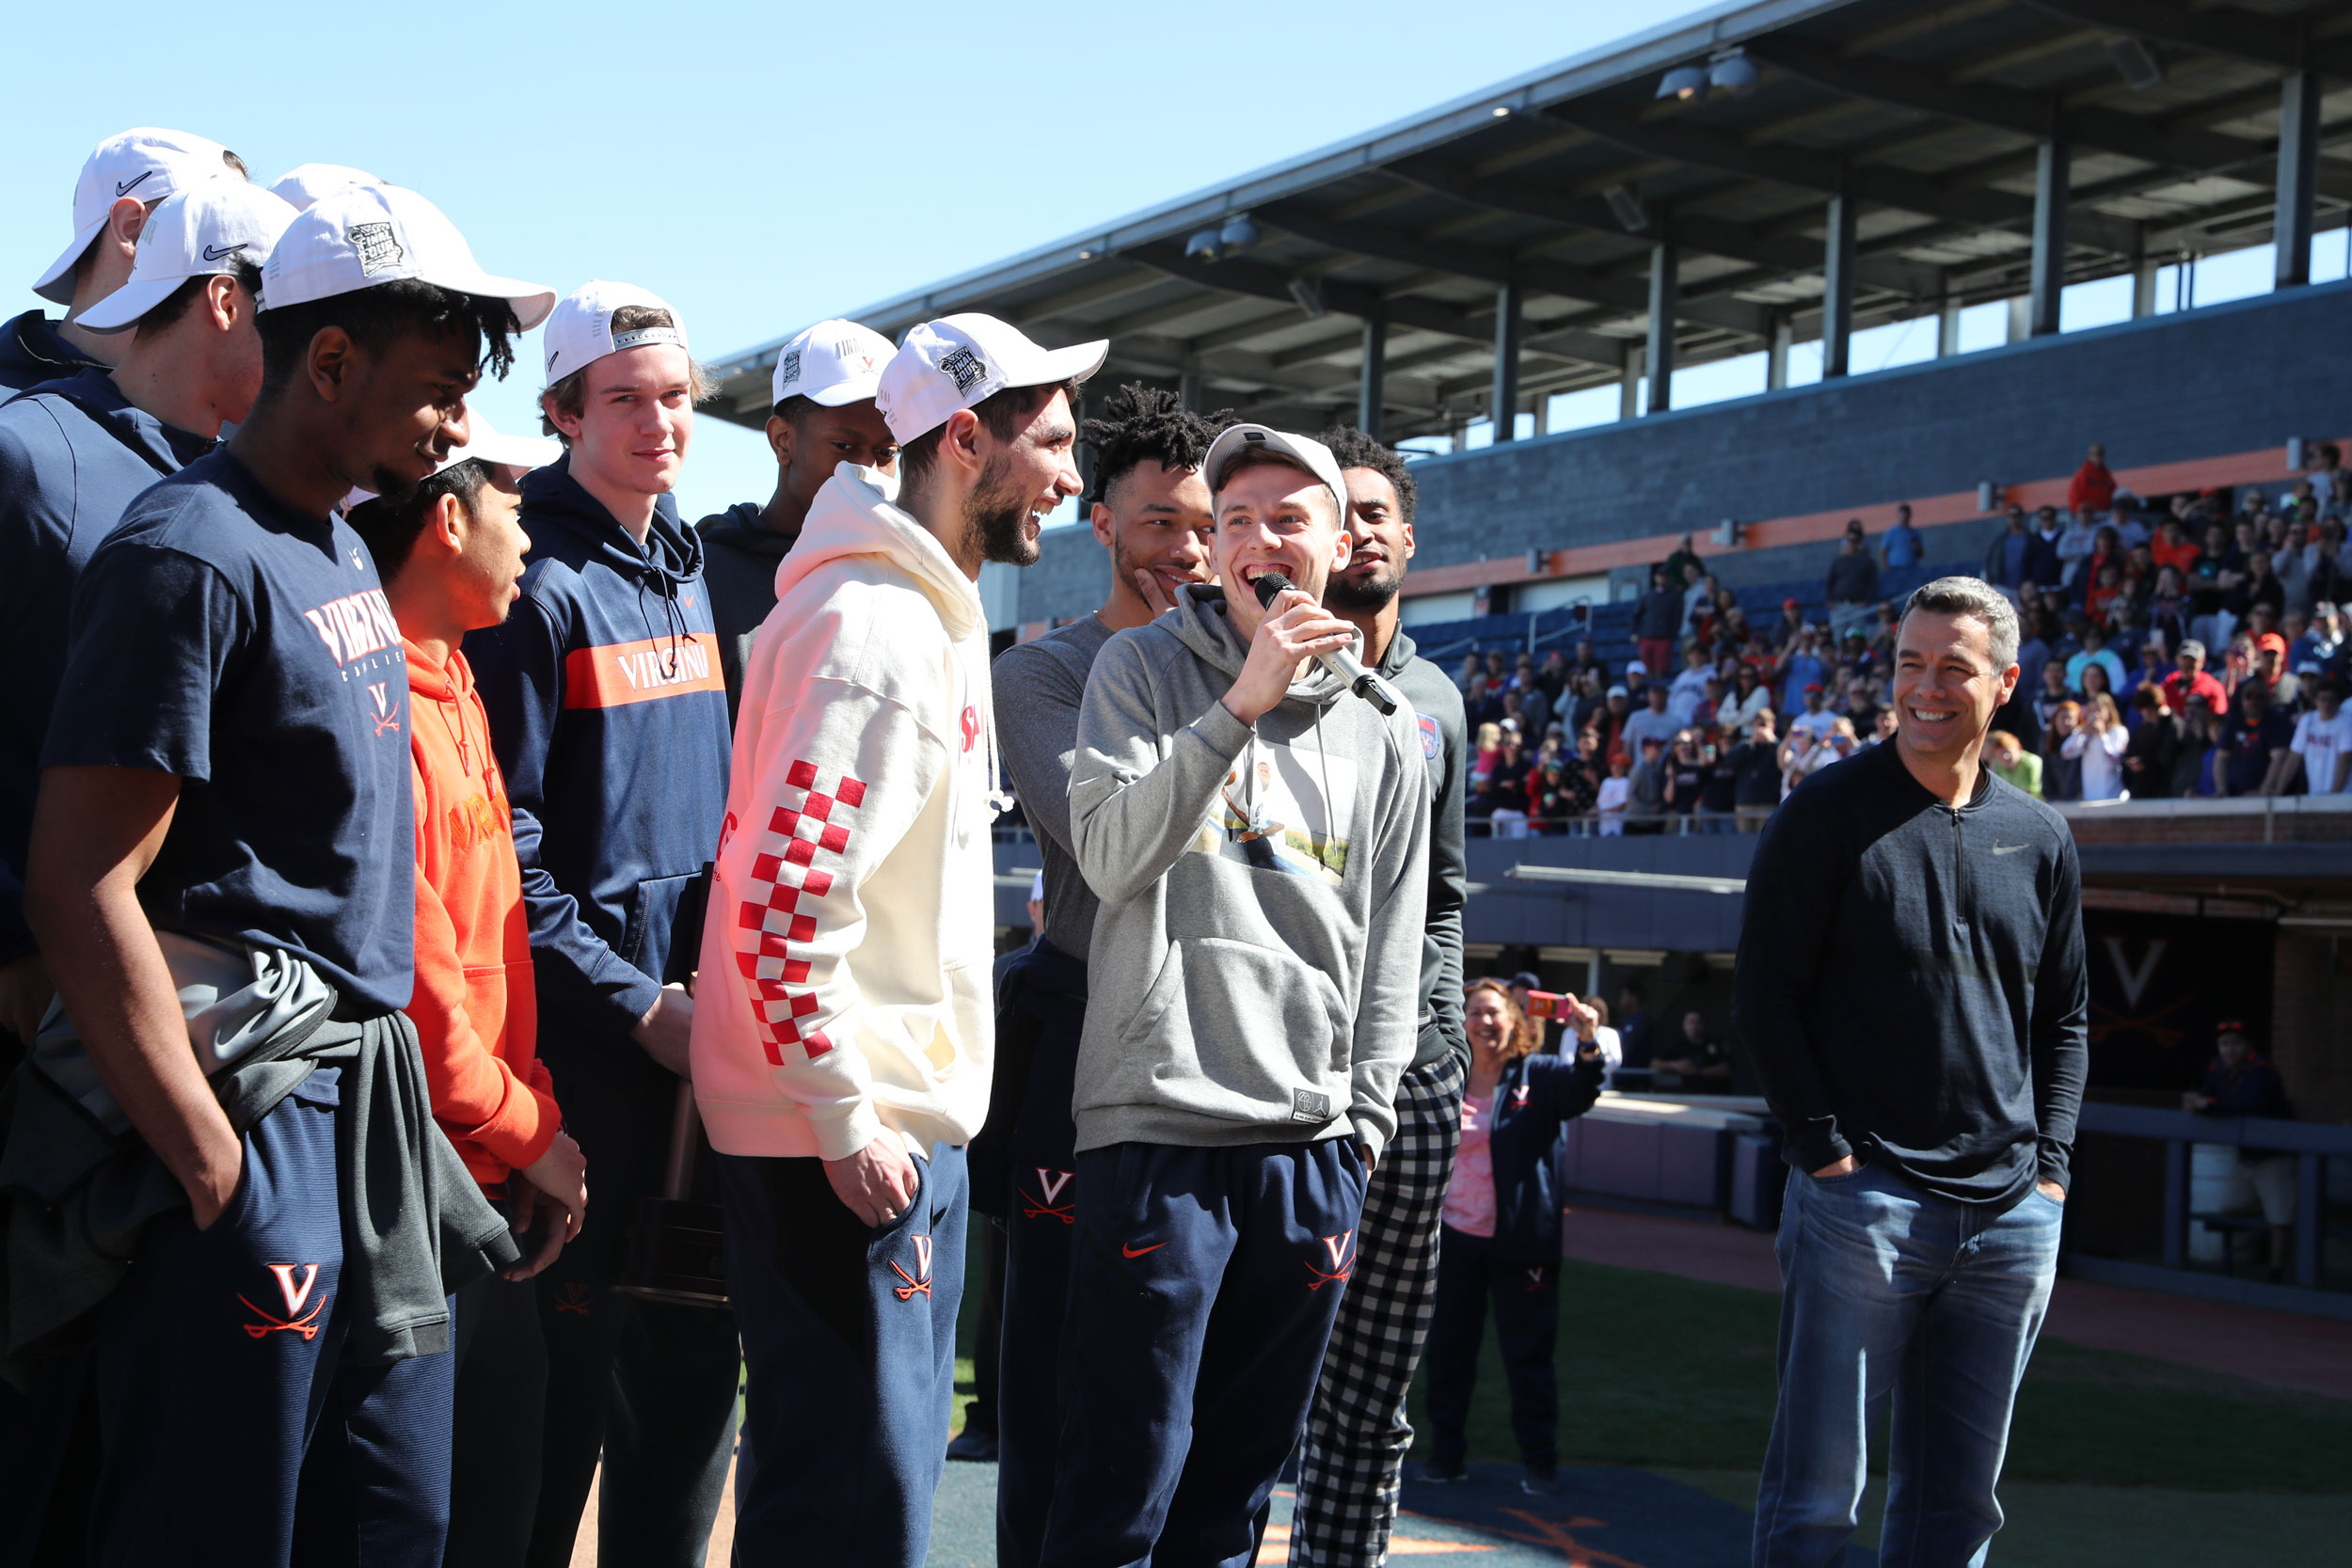 UVA basketball team speaking into a microphone during a celebration